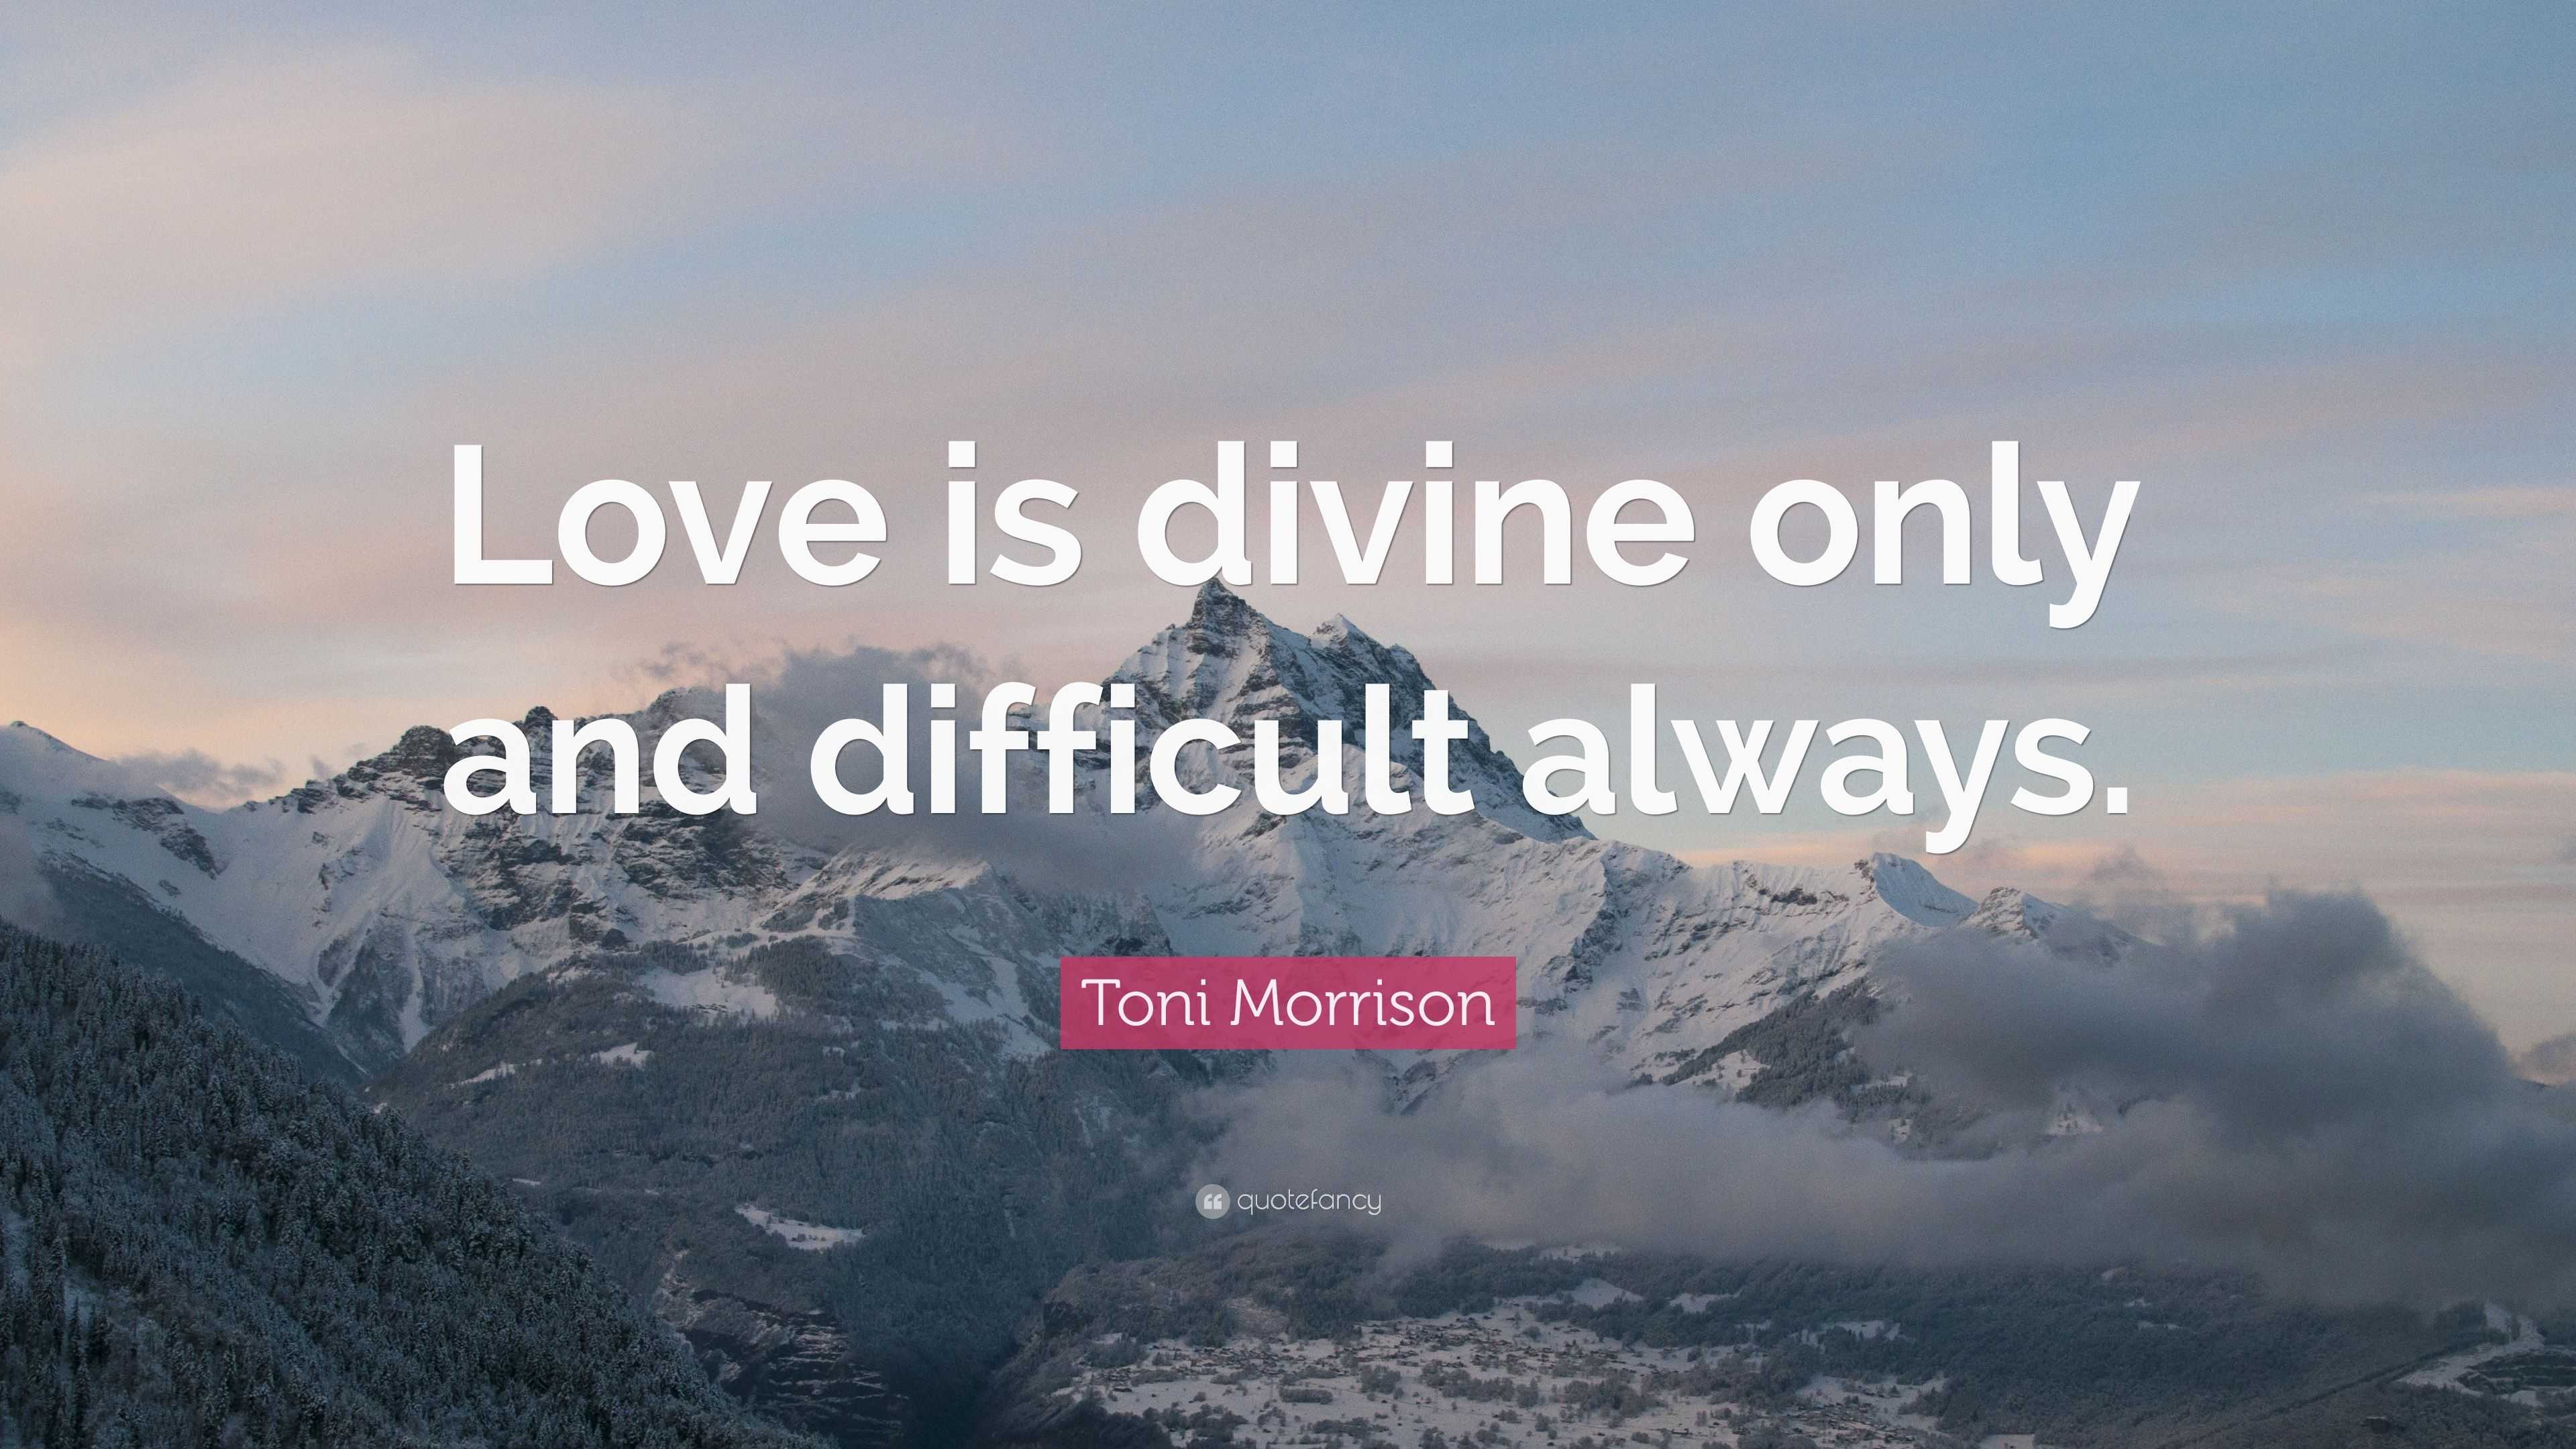 Toni Morrison Quote: “Love is divine only and difficult always.”